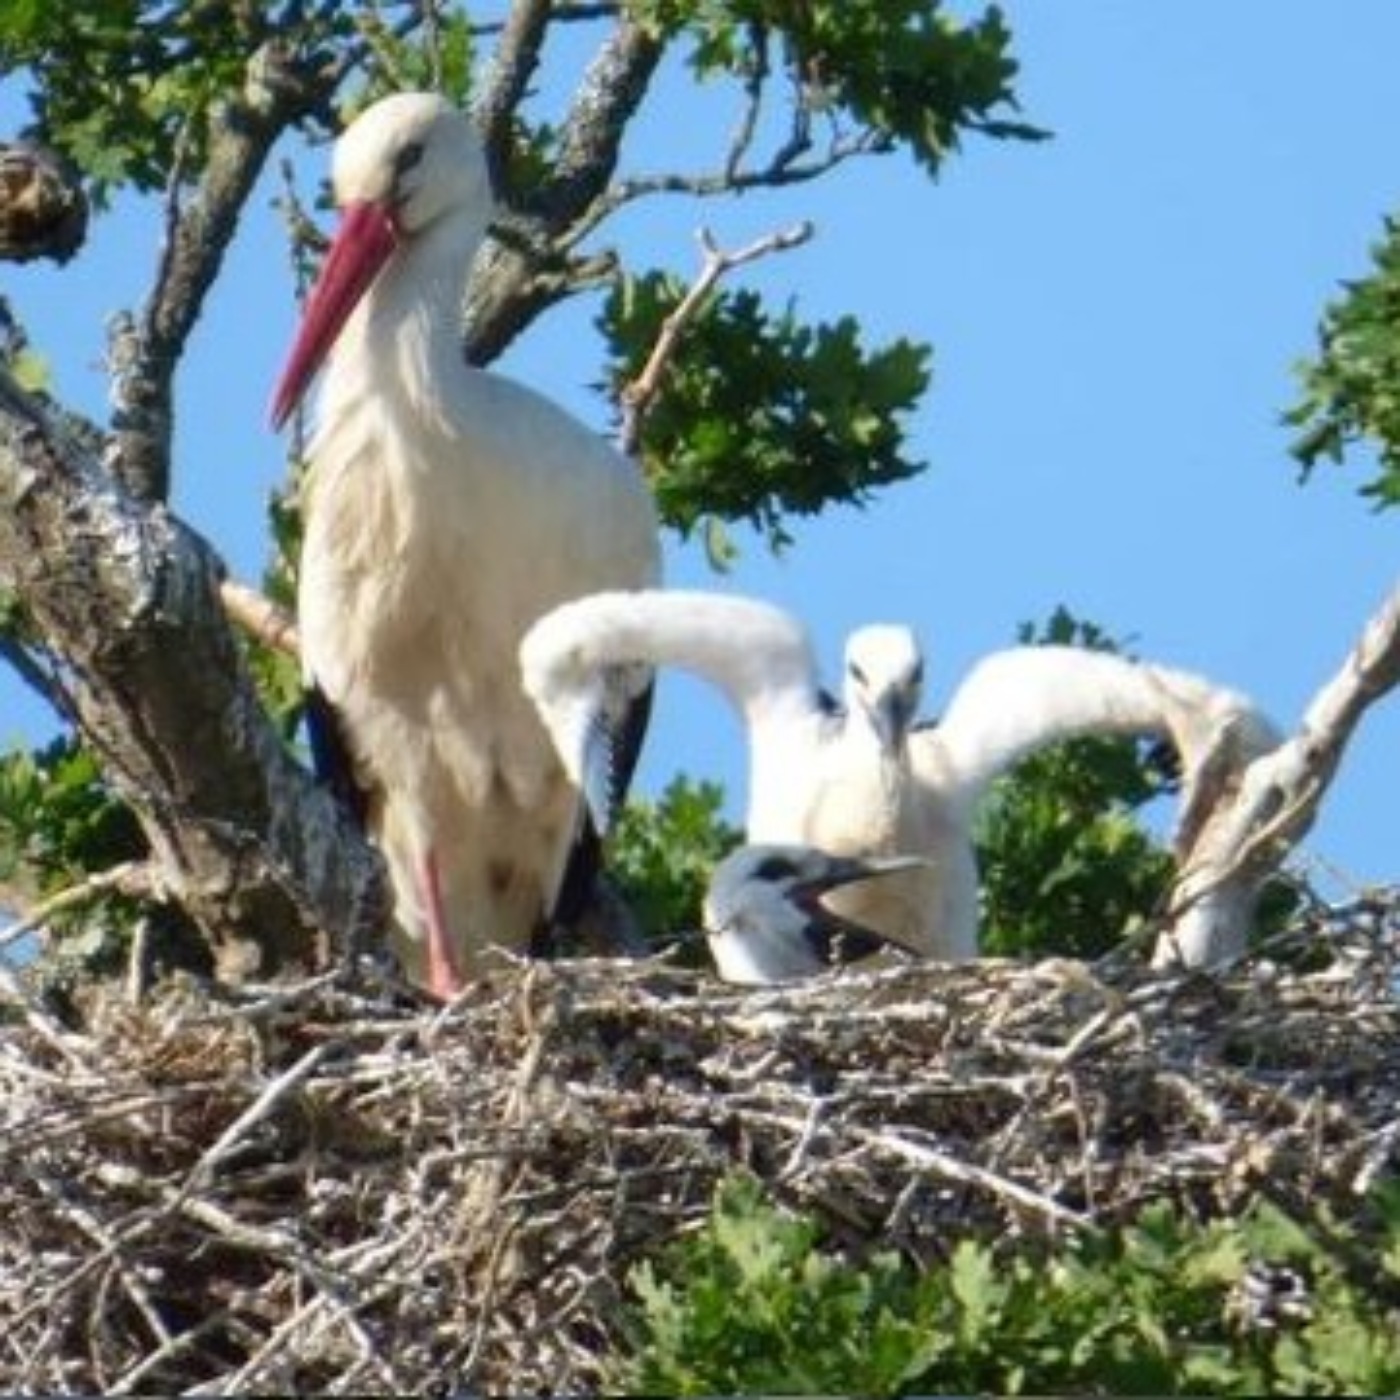 The White Stork Project